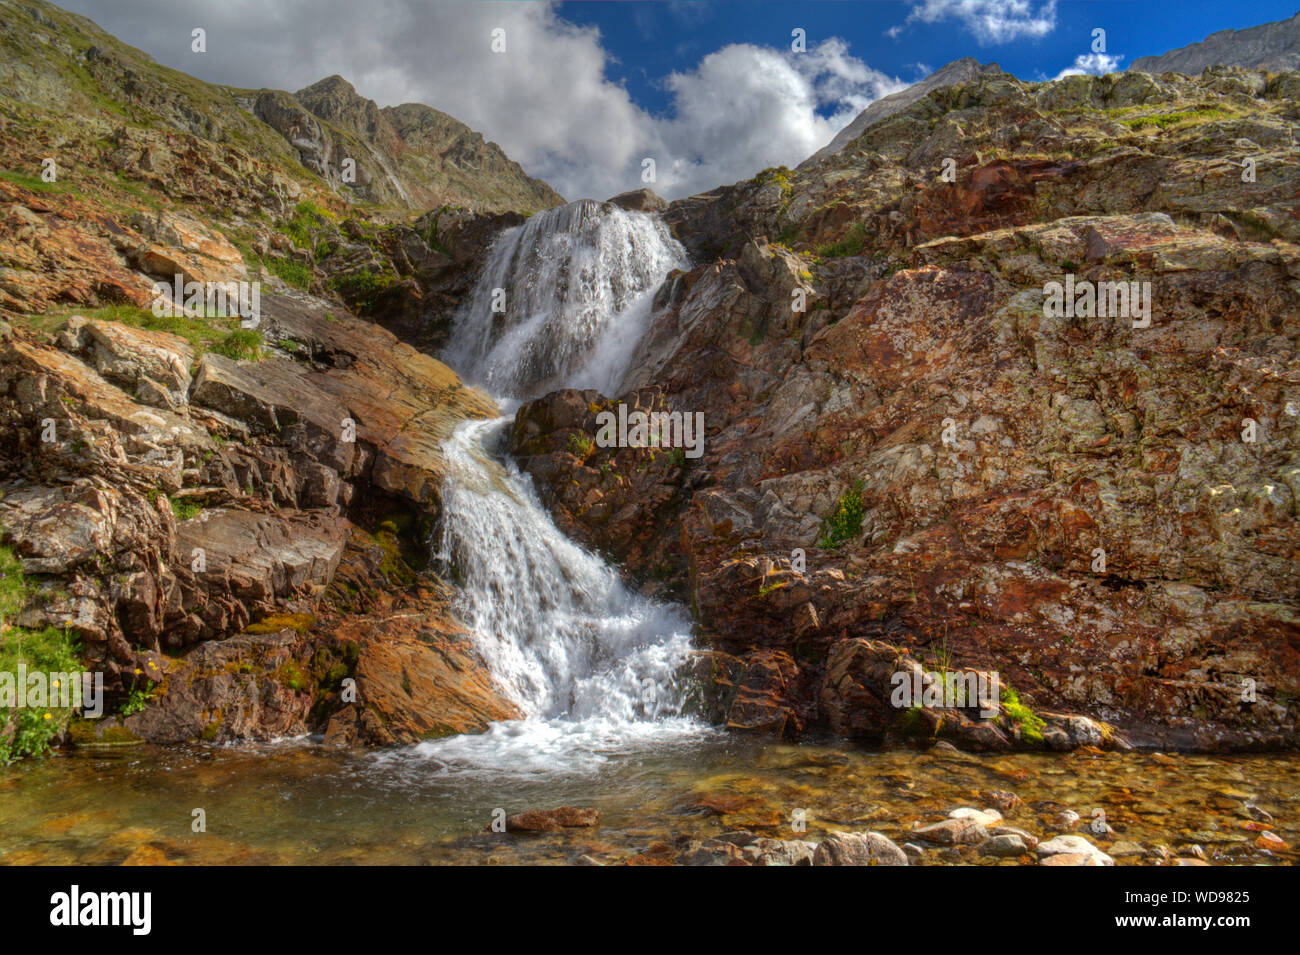 Small waterfall over red colored rocks and boulders, splashing in a small lake Stock Photo